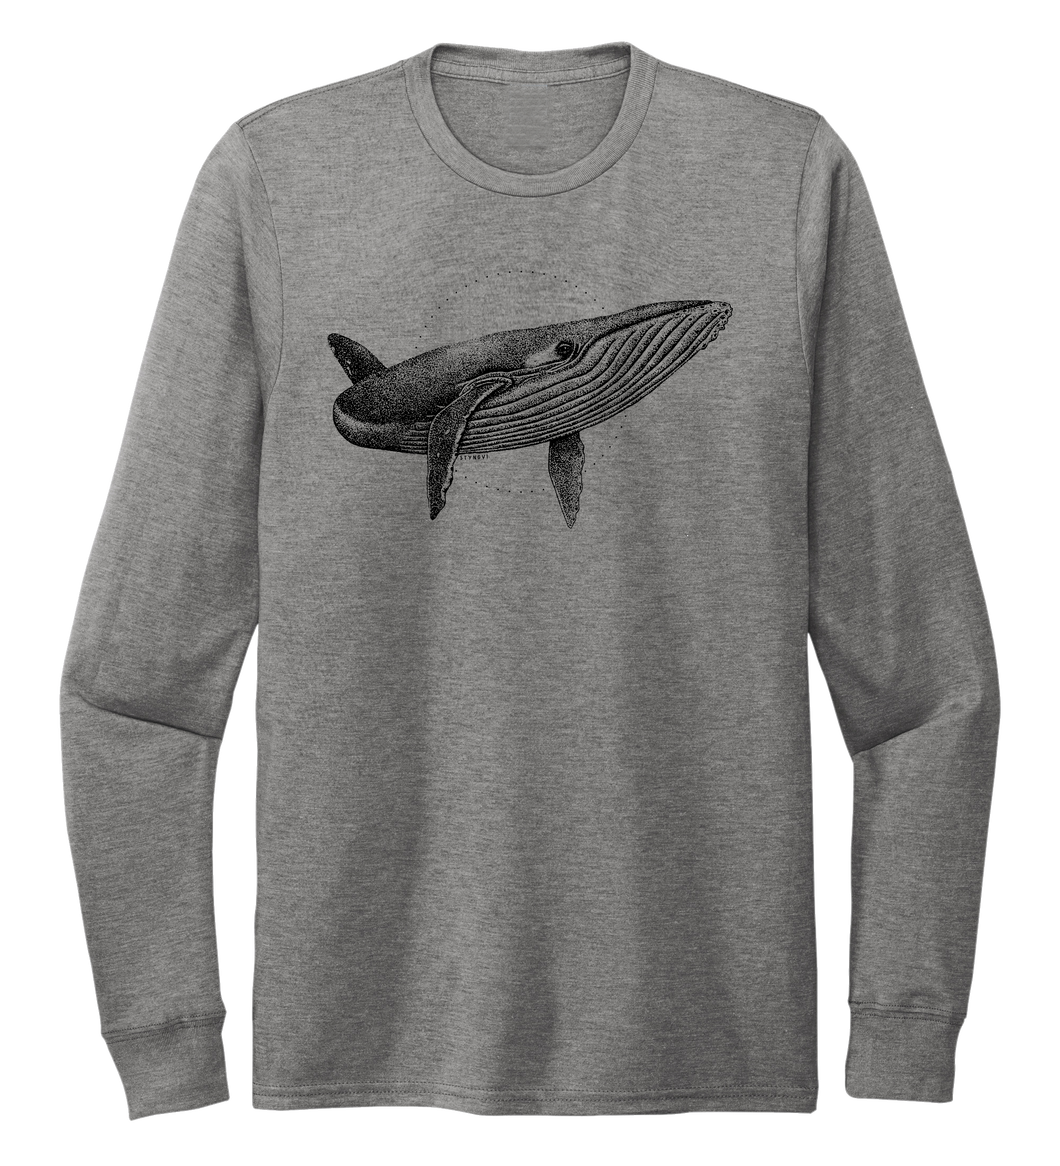 STYNGVI, Humpback Whale, Unisex Crew Neck Long Sleeve T-shirt in Oyster Grey